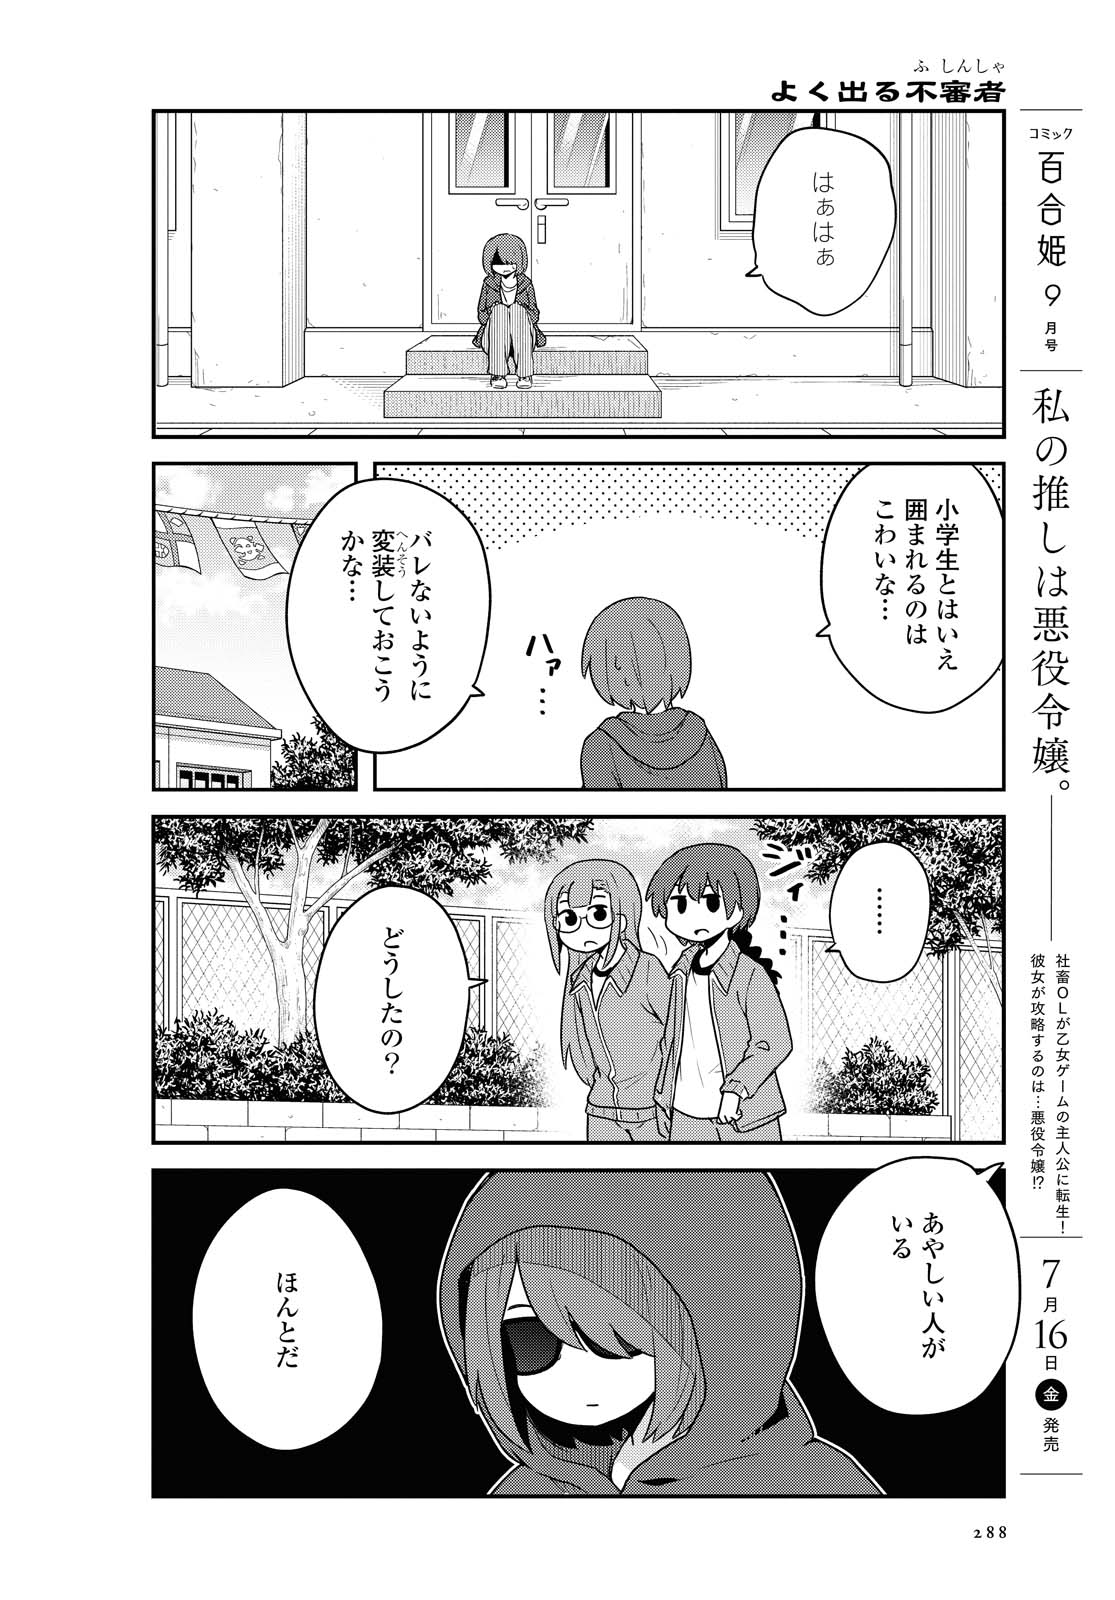 Wataten! An Angel Flew Down to Me 私に天使が舞い降りた！ 第84話 - Page 4